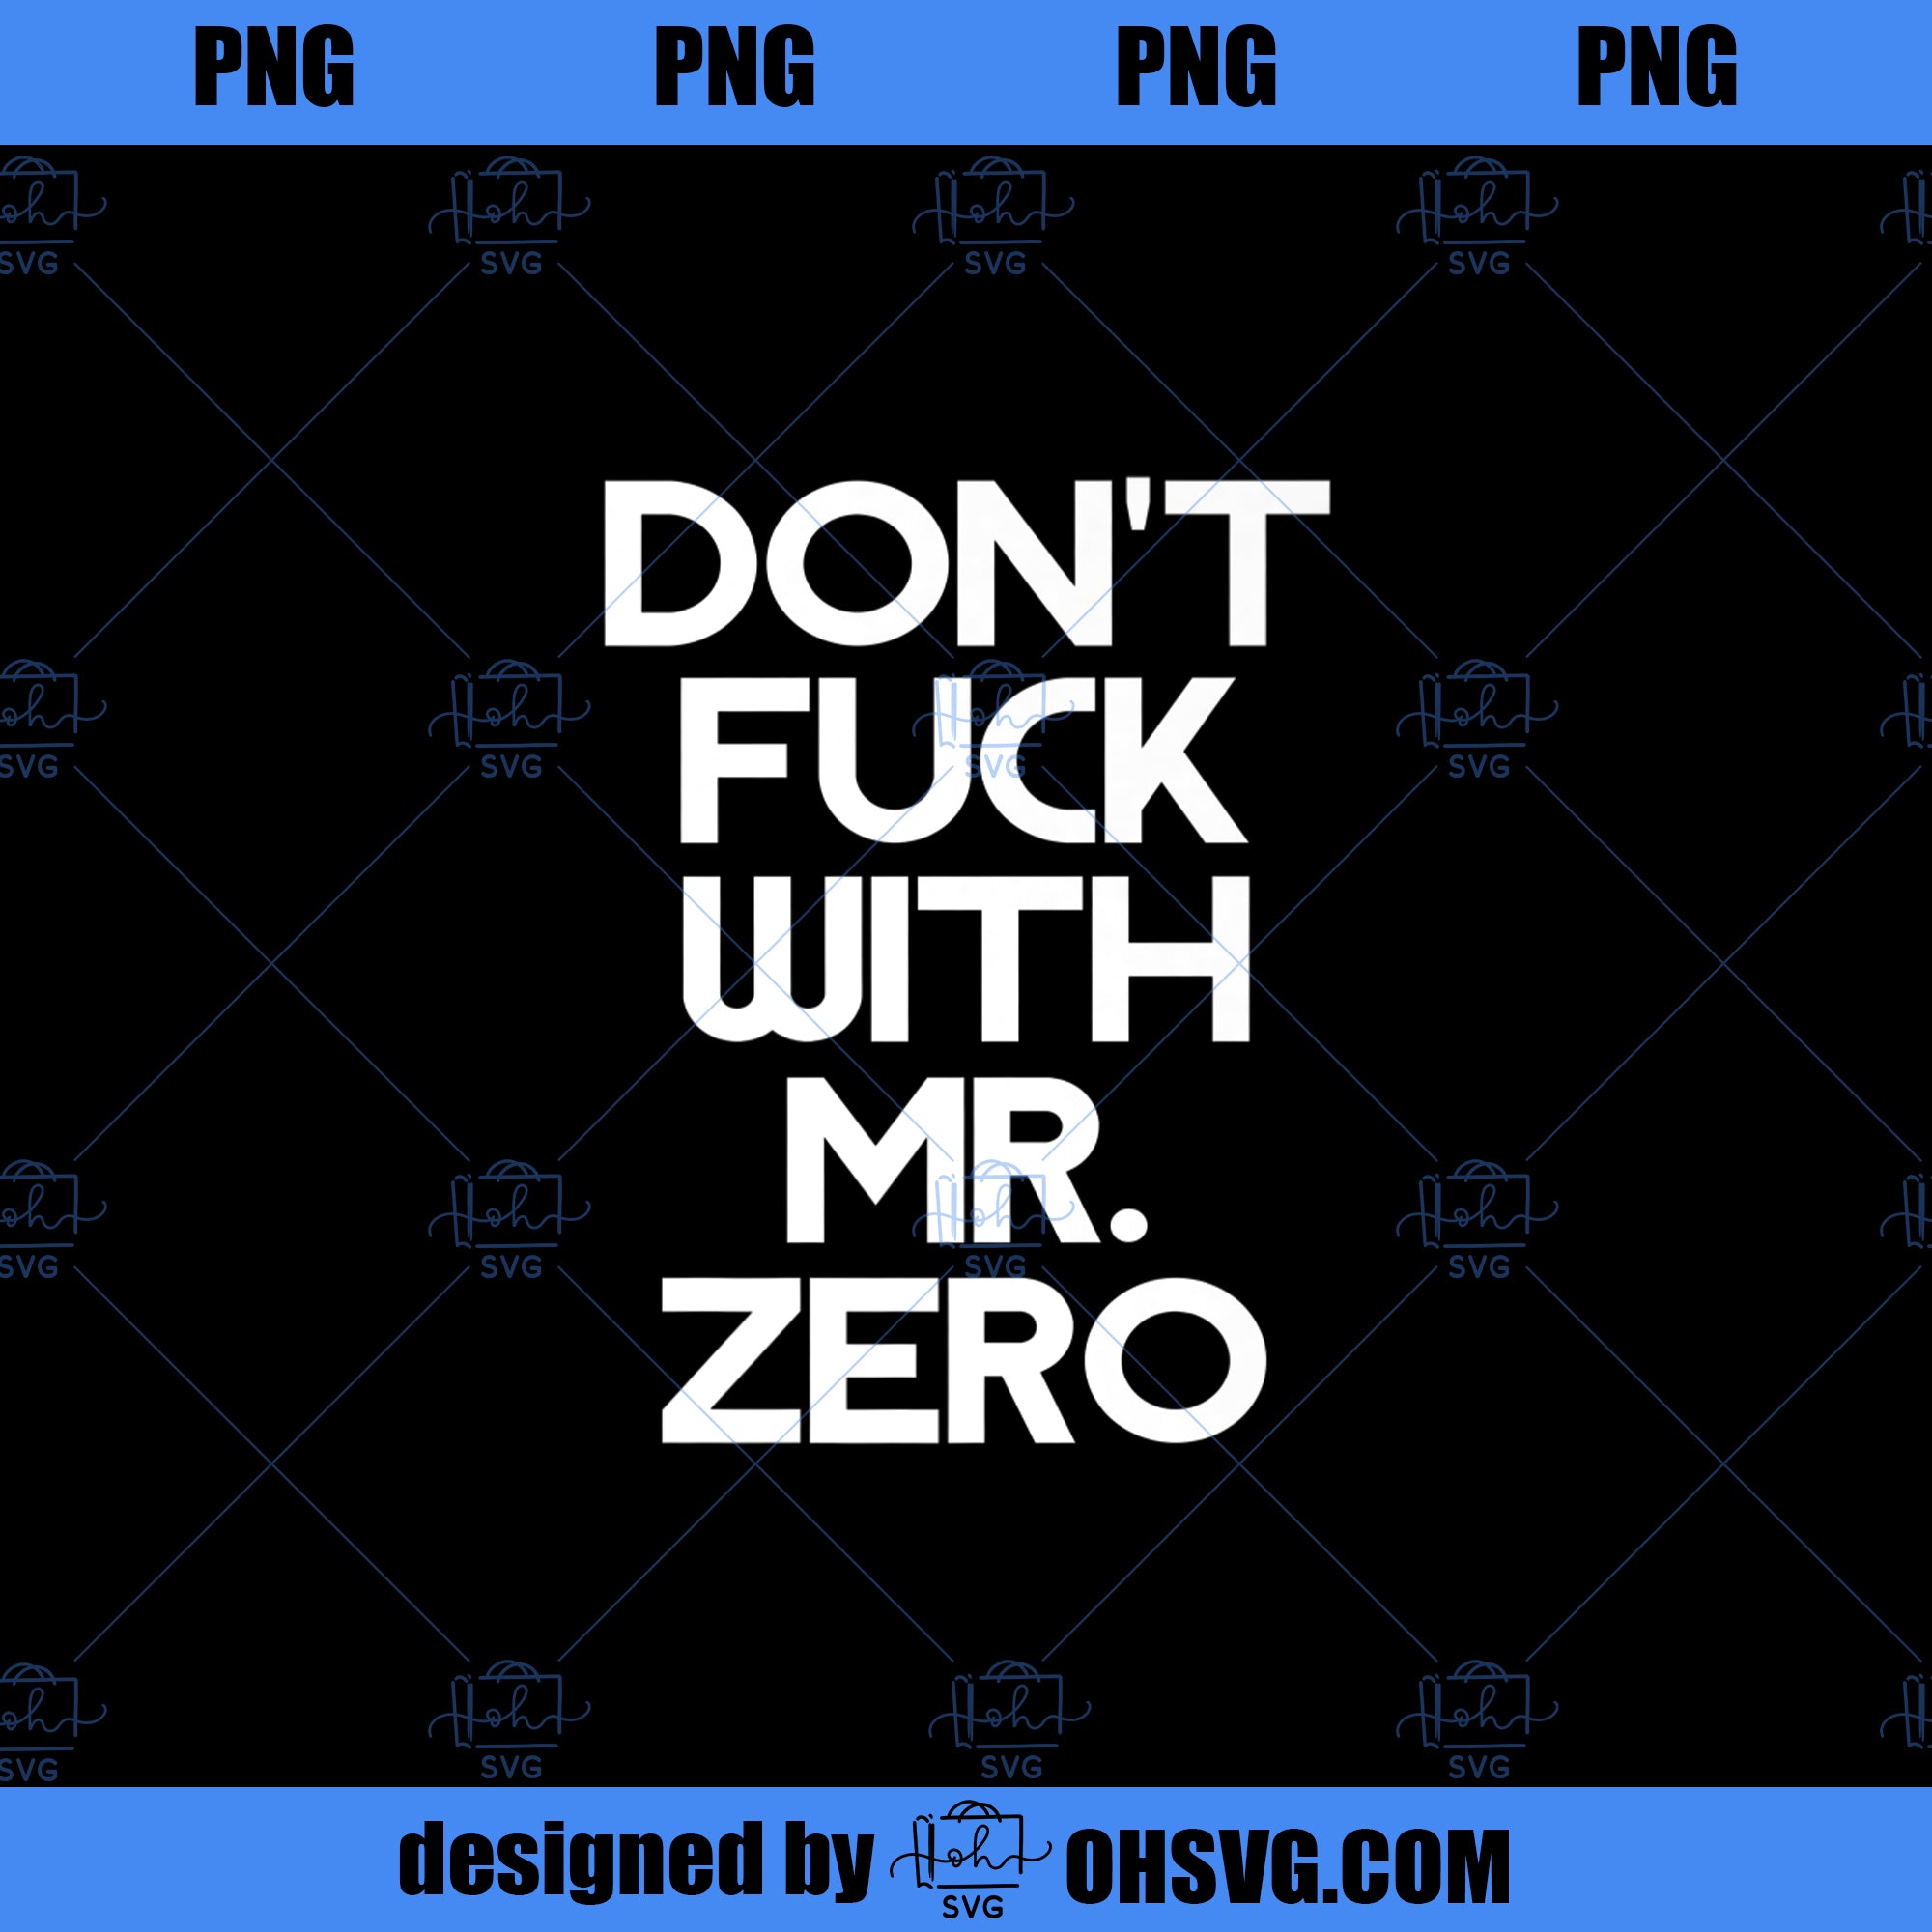 Mr Zero PNG, Movies PNG, Zero PNG